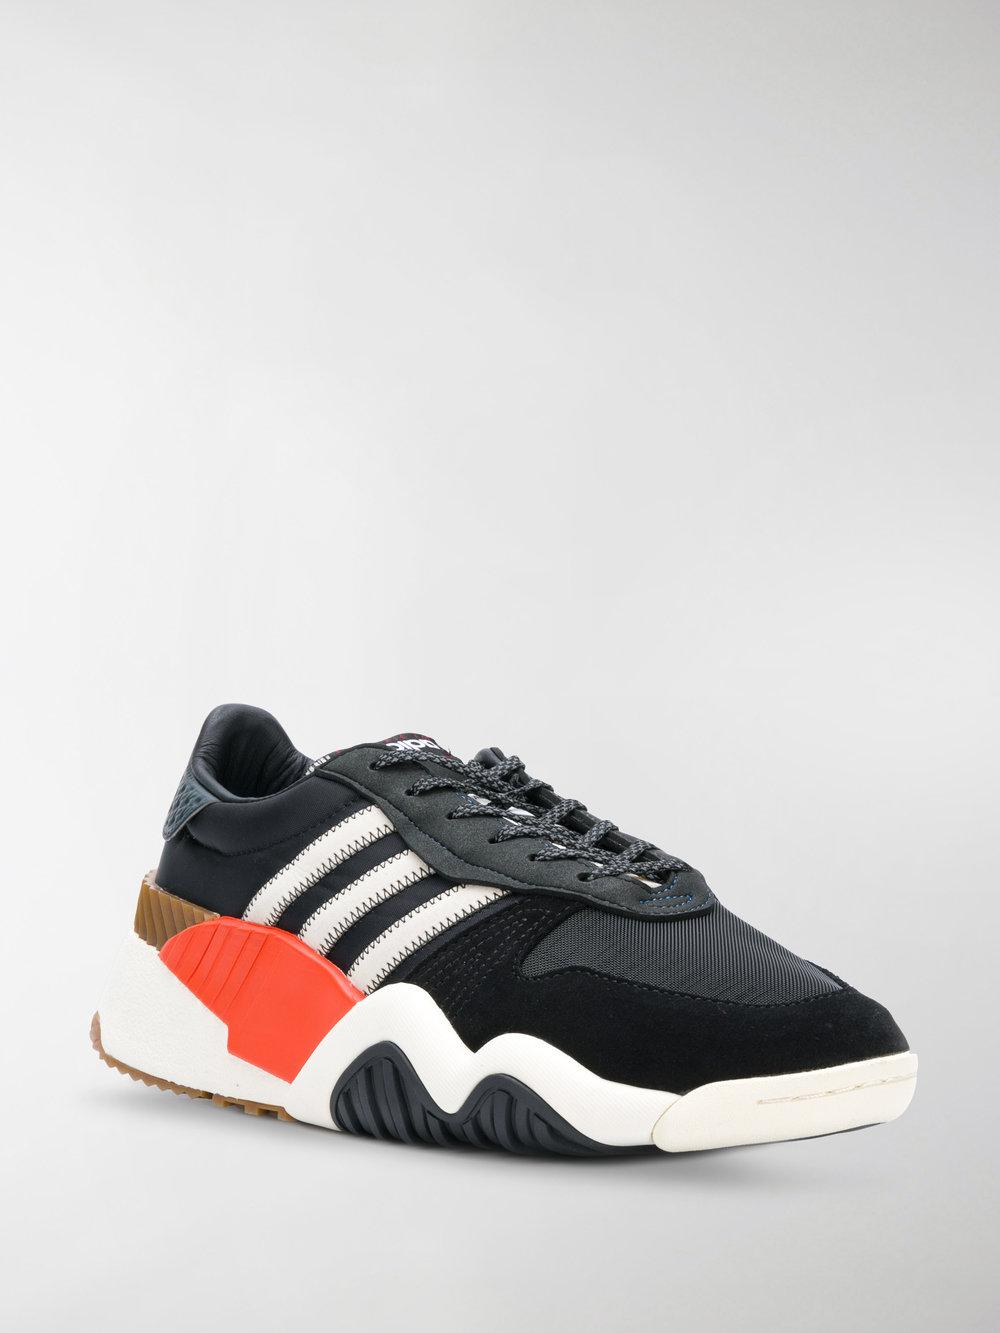 adidas Synthetic Alexander Wang X Turnout Trainer in Black for Men - Lyst